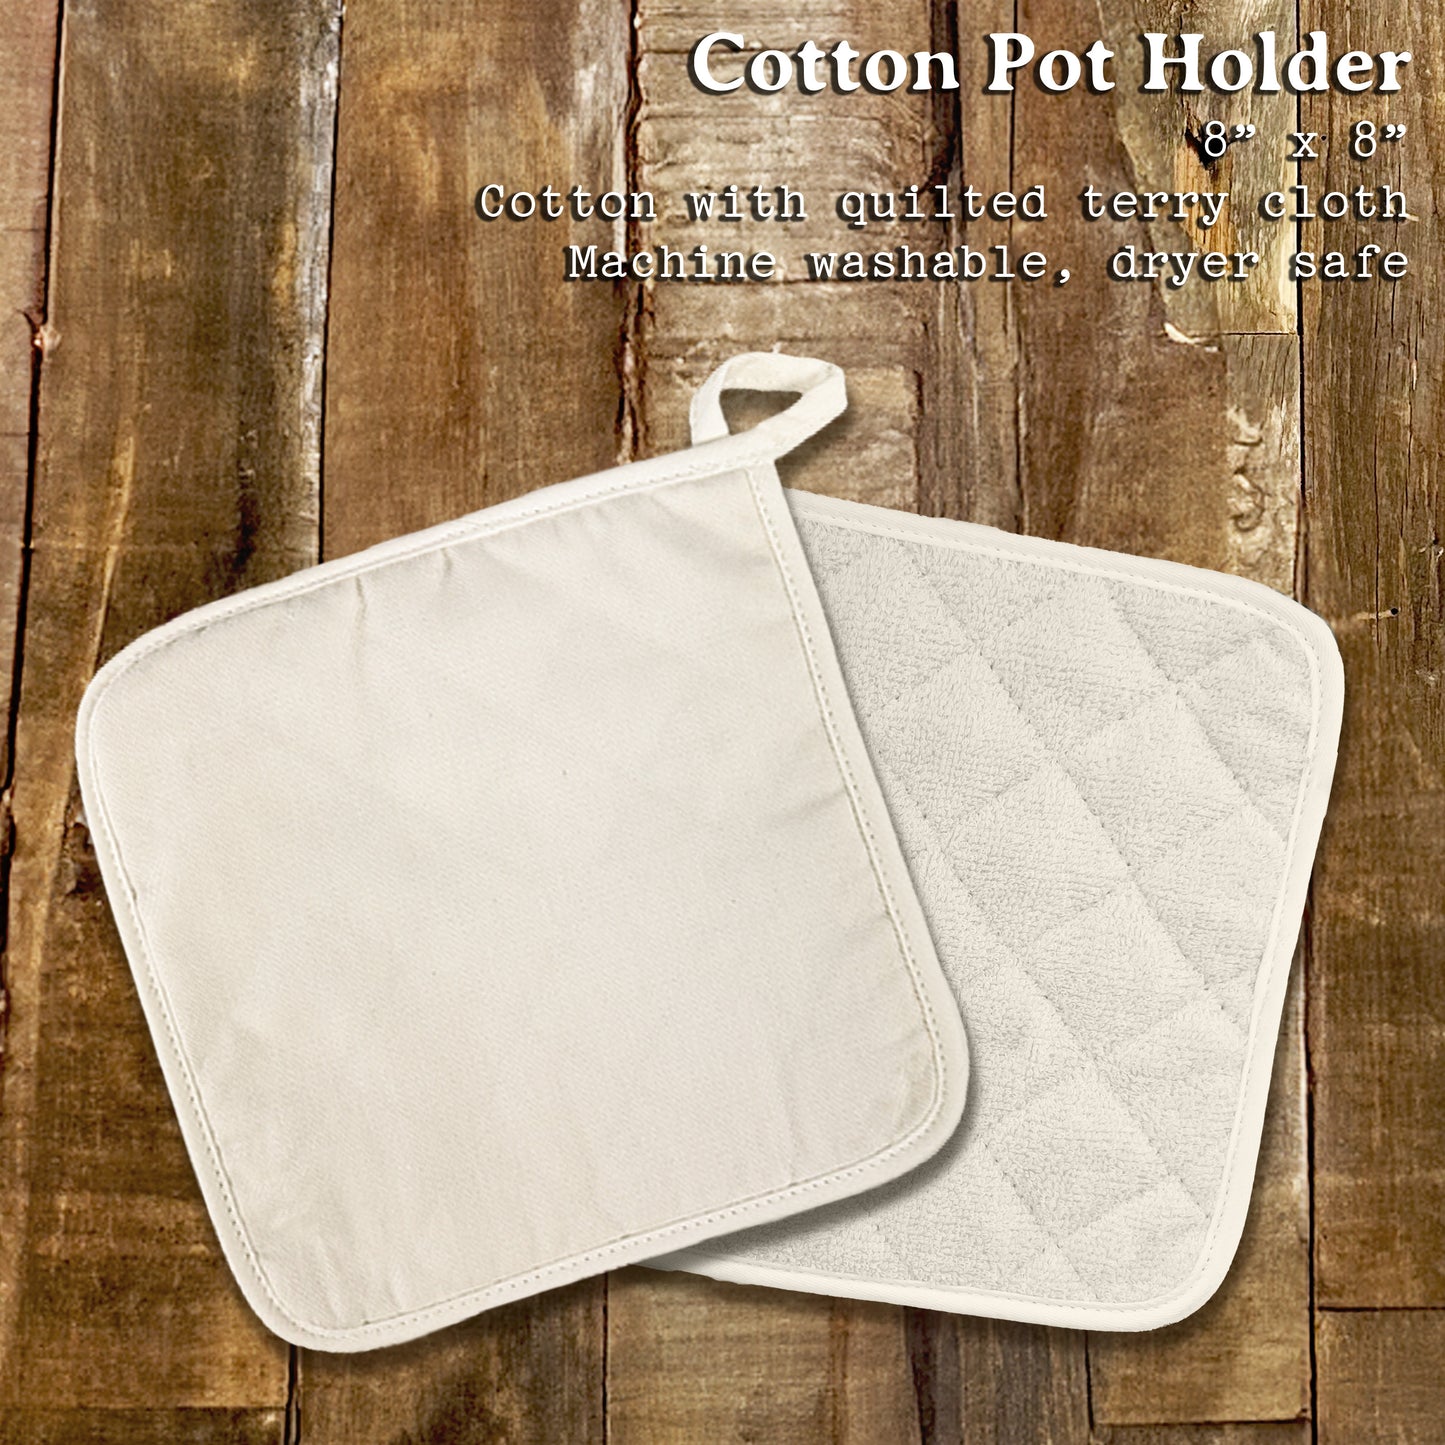 The Cabin is my Happy Place - Cotton Pot Holder